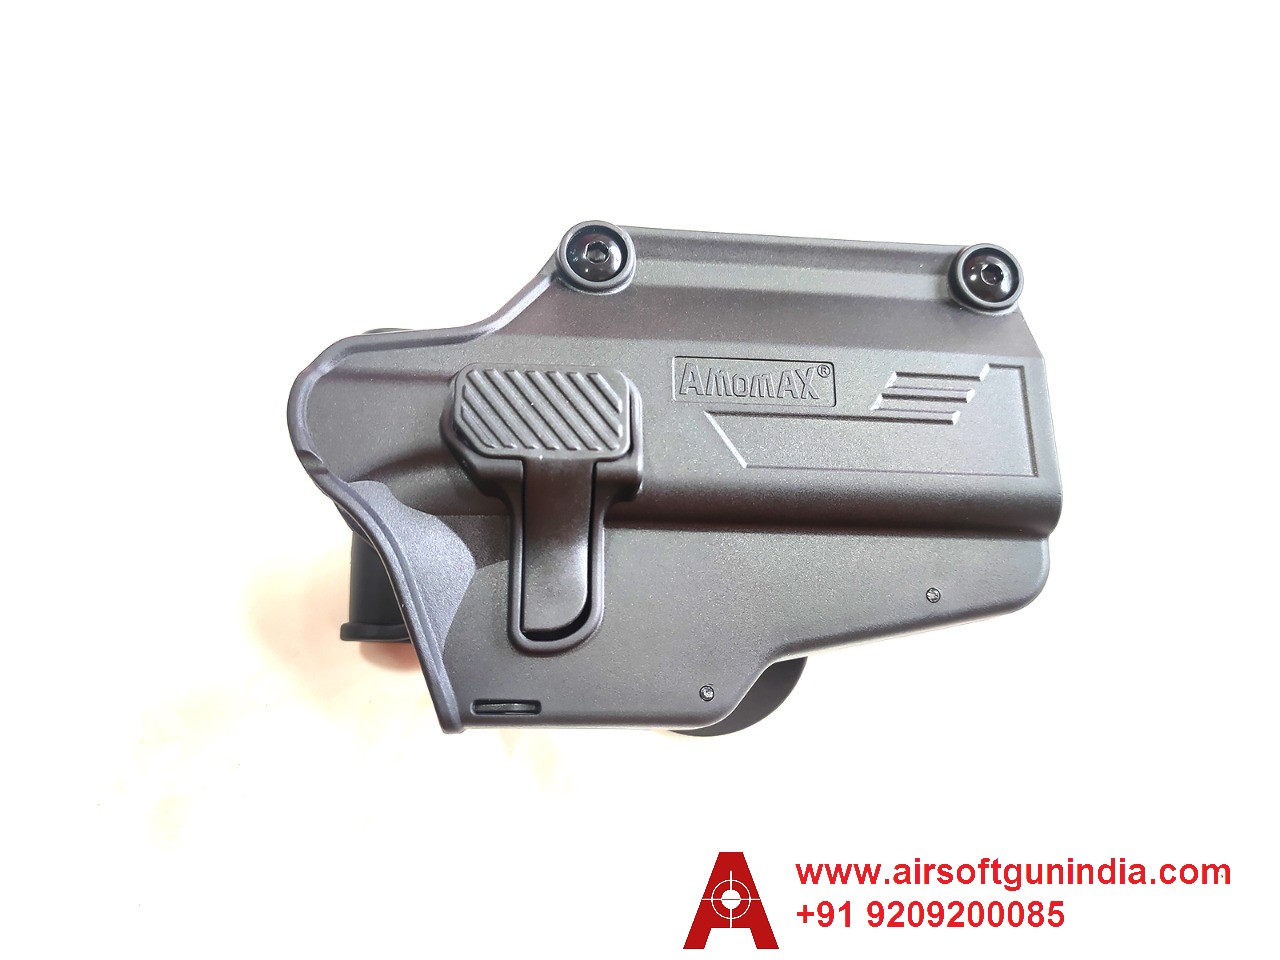 Universal Holster For Air Pistol By Airsoft Gun India